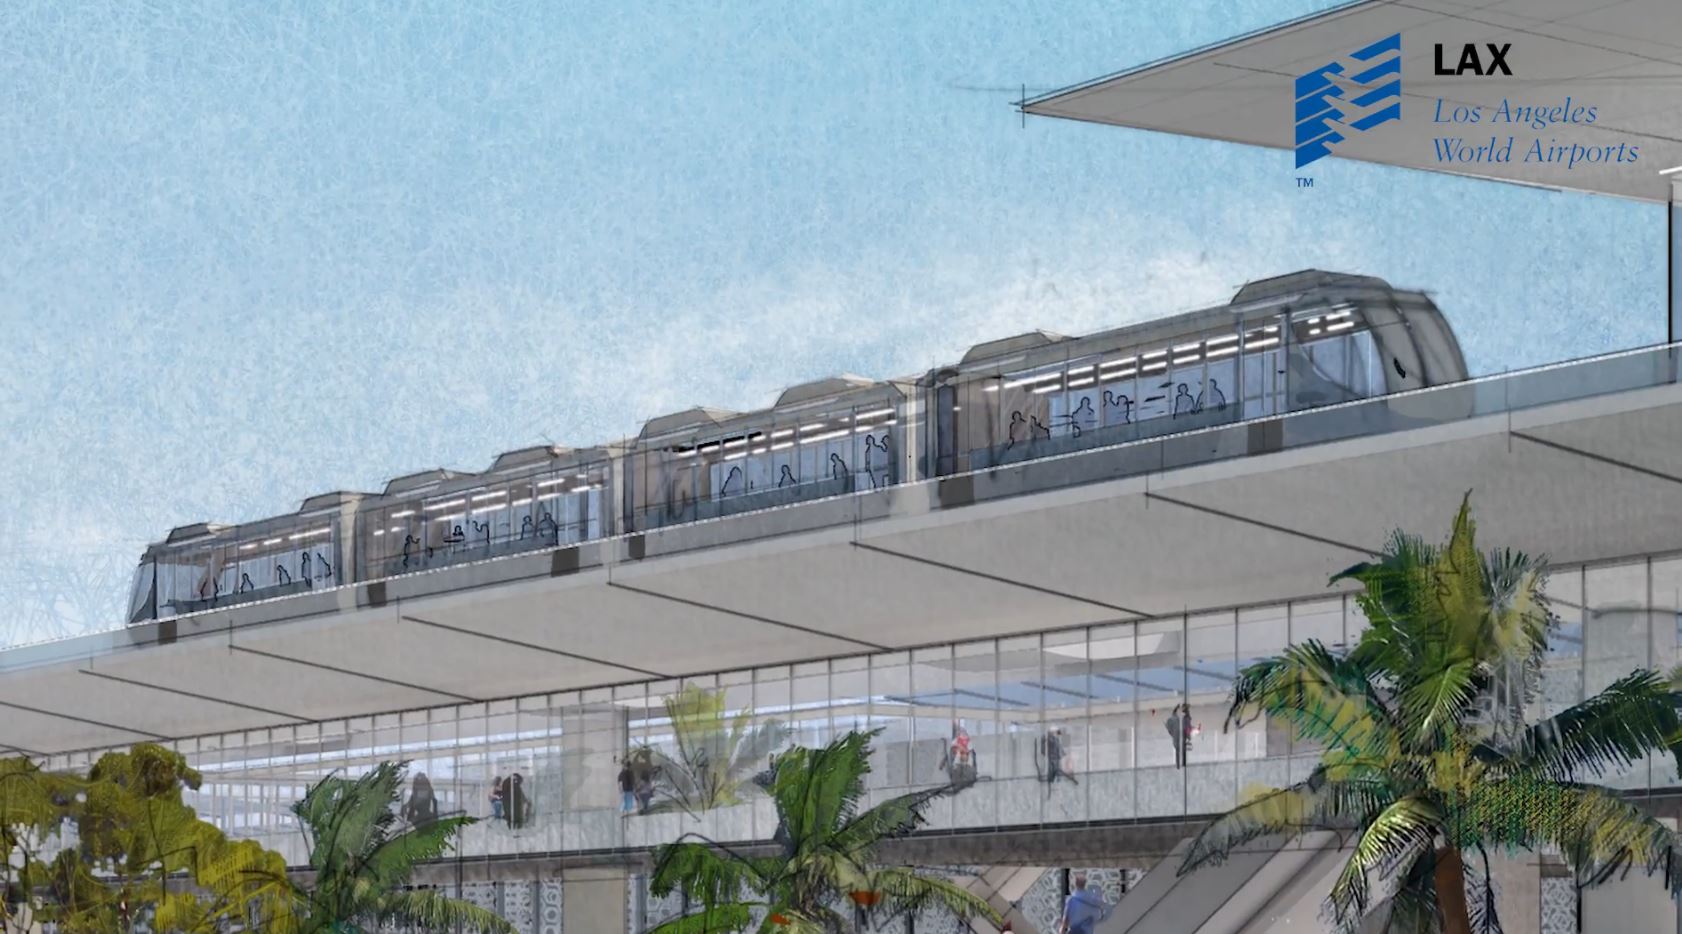 The Future of LAX – Automated People Mover